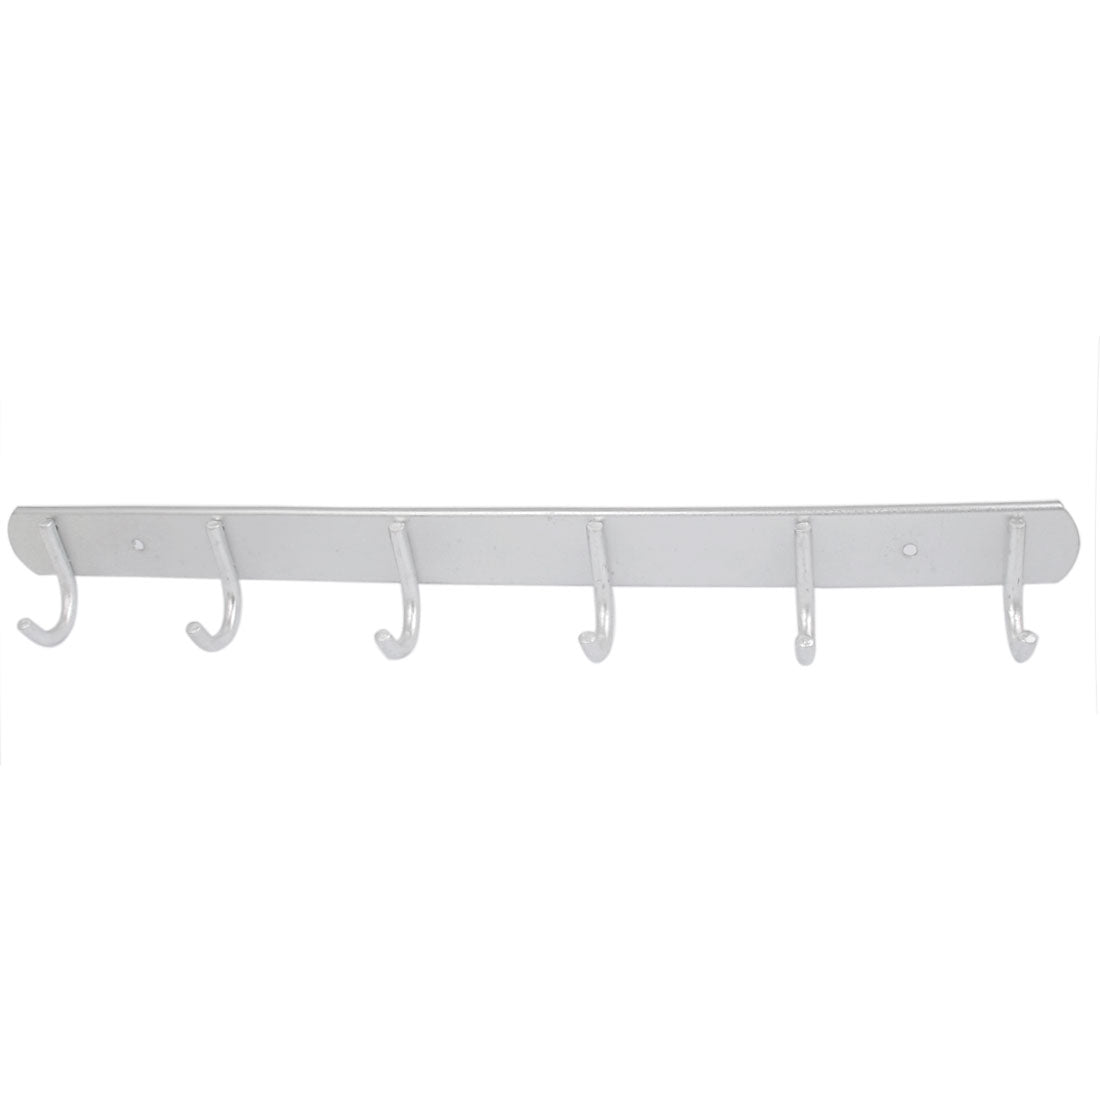 uxcell Uxcell Bedroom Kitchen Aluminum 6 Hooks Wall Mounted Hanger Towel Clothes Hanging Rack